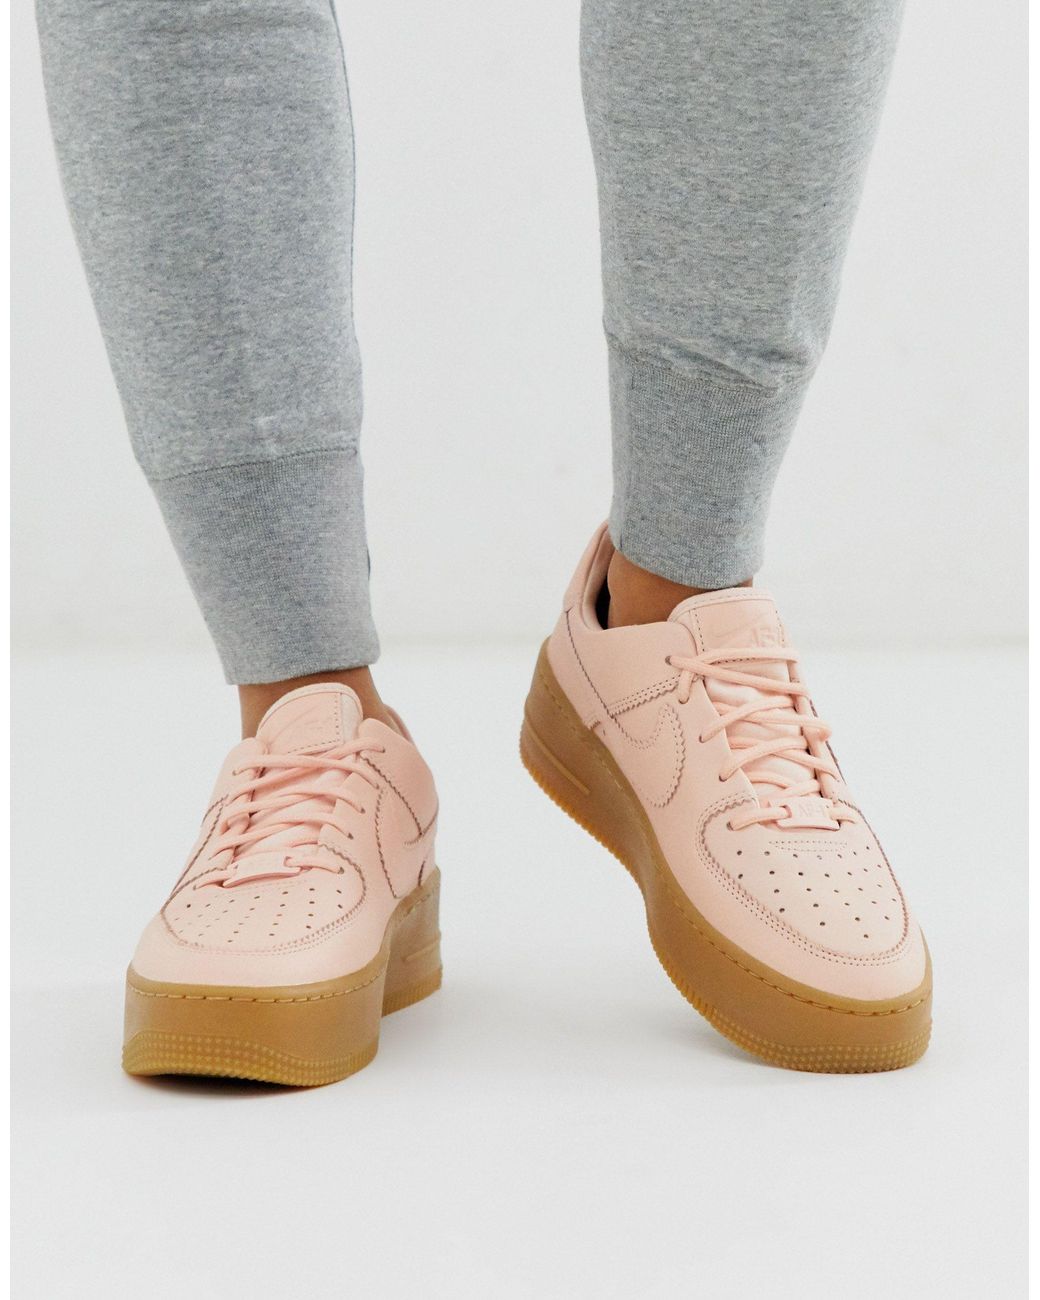 Nike Pale Gum Sole Air Force 1 Sage Low Trainers in Pink | Lyst Canada